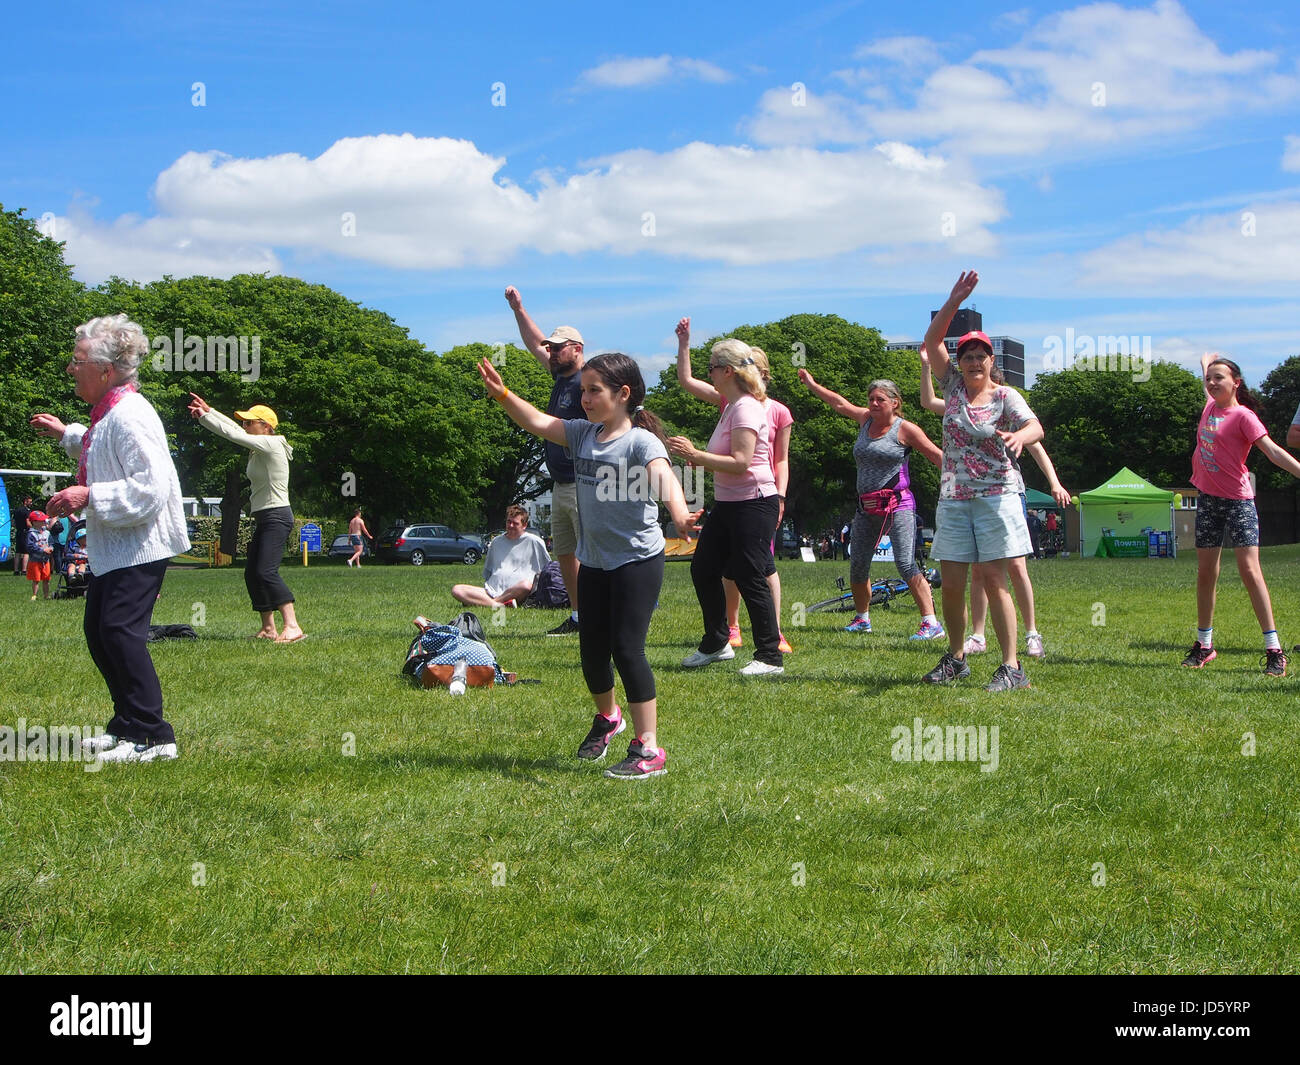 People taking part in a mixed age and ability exercise class outdoors Stock Photo